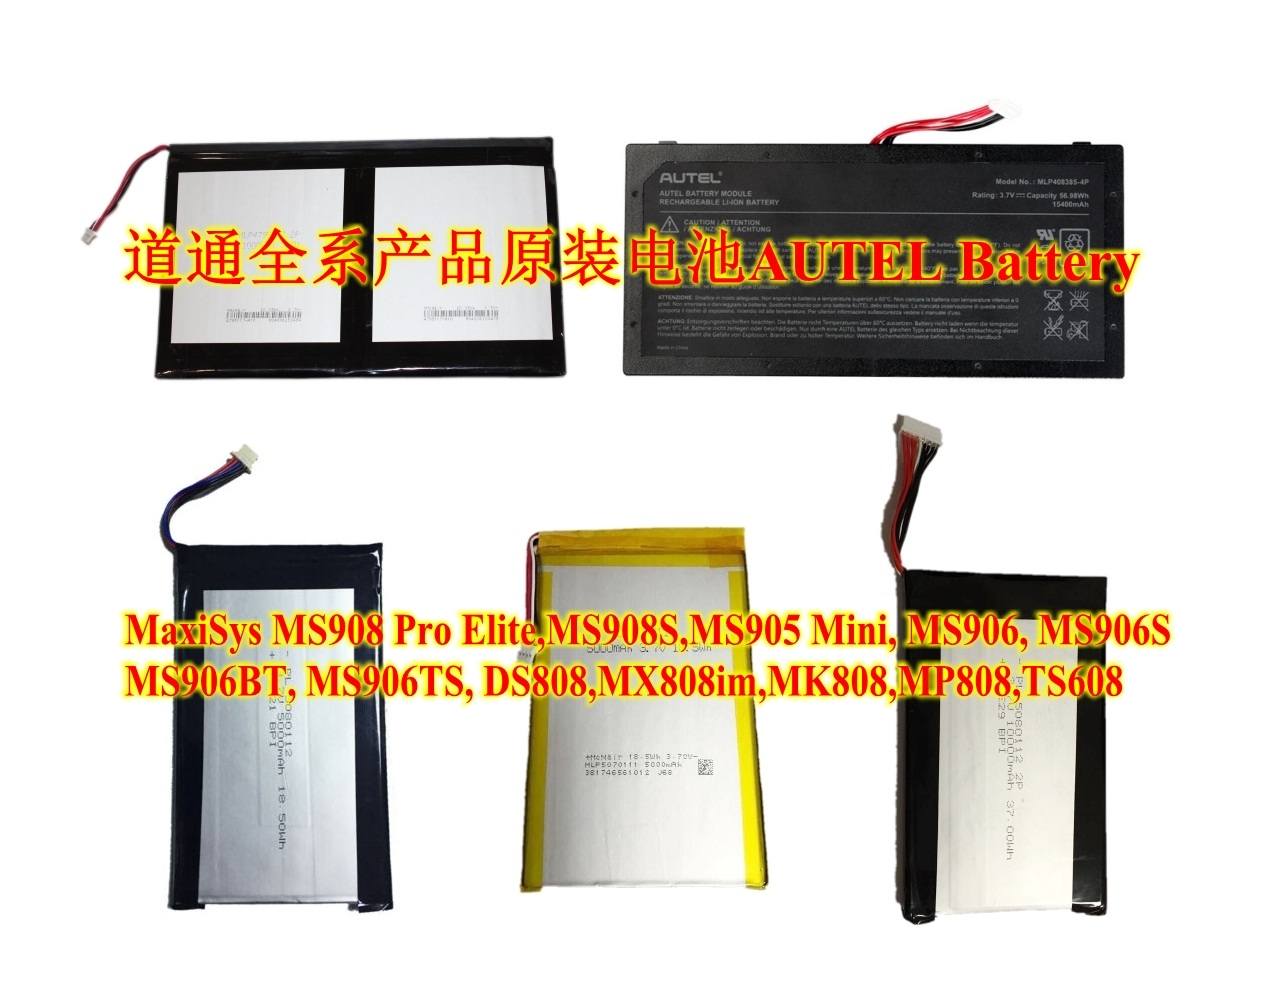 Autel MaxiSys Battery For Elite MS908 MS908S PRO MS908CV MS906TS MS906BT TS608 DS808 MX808IM MK808 MP808